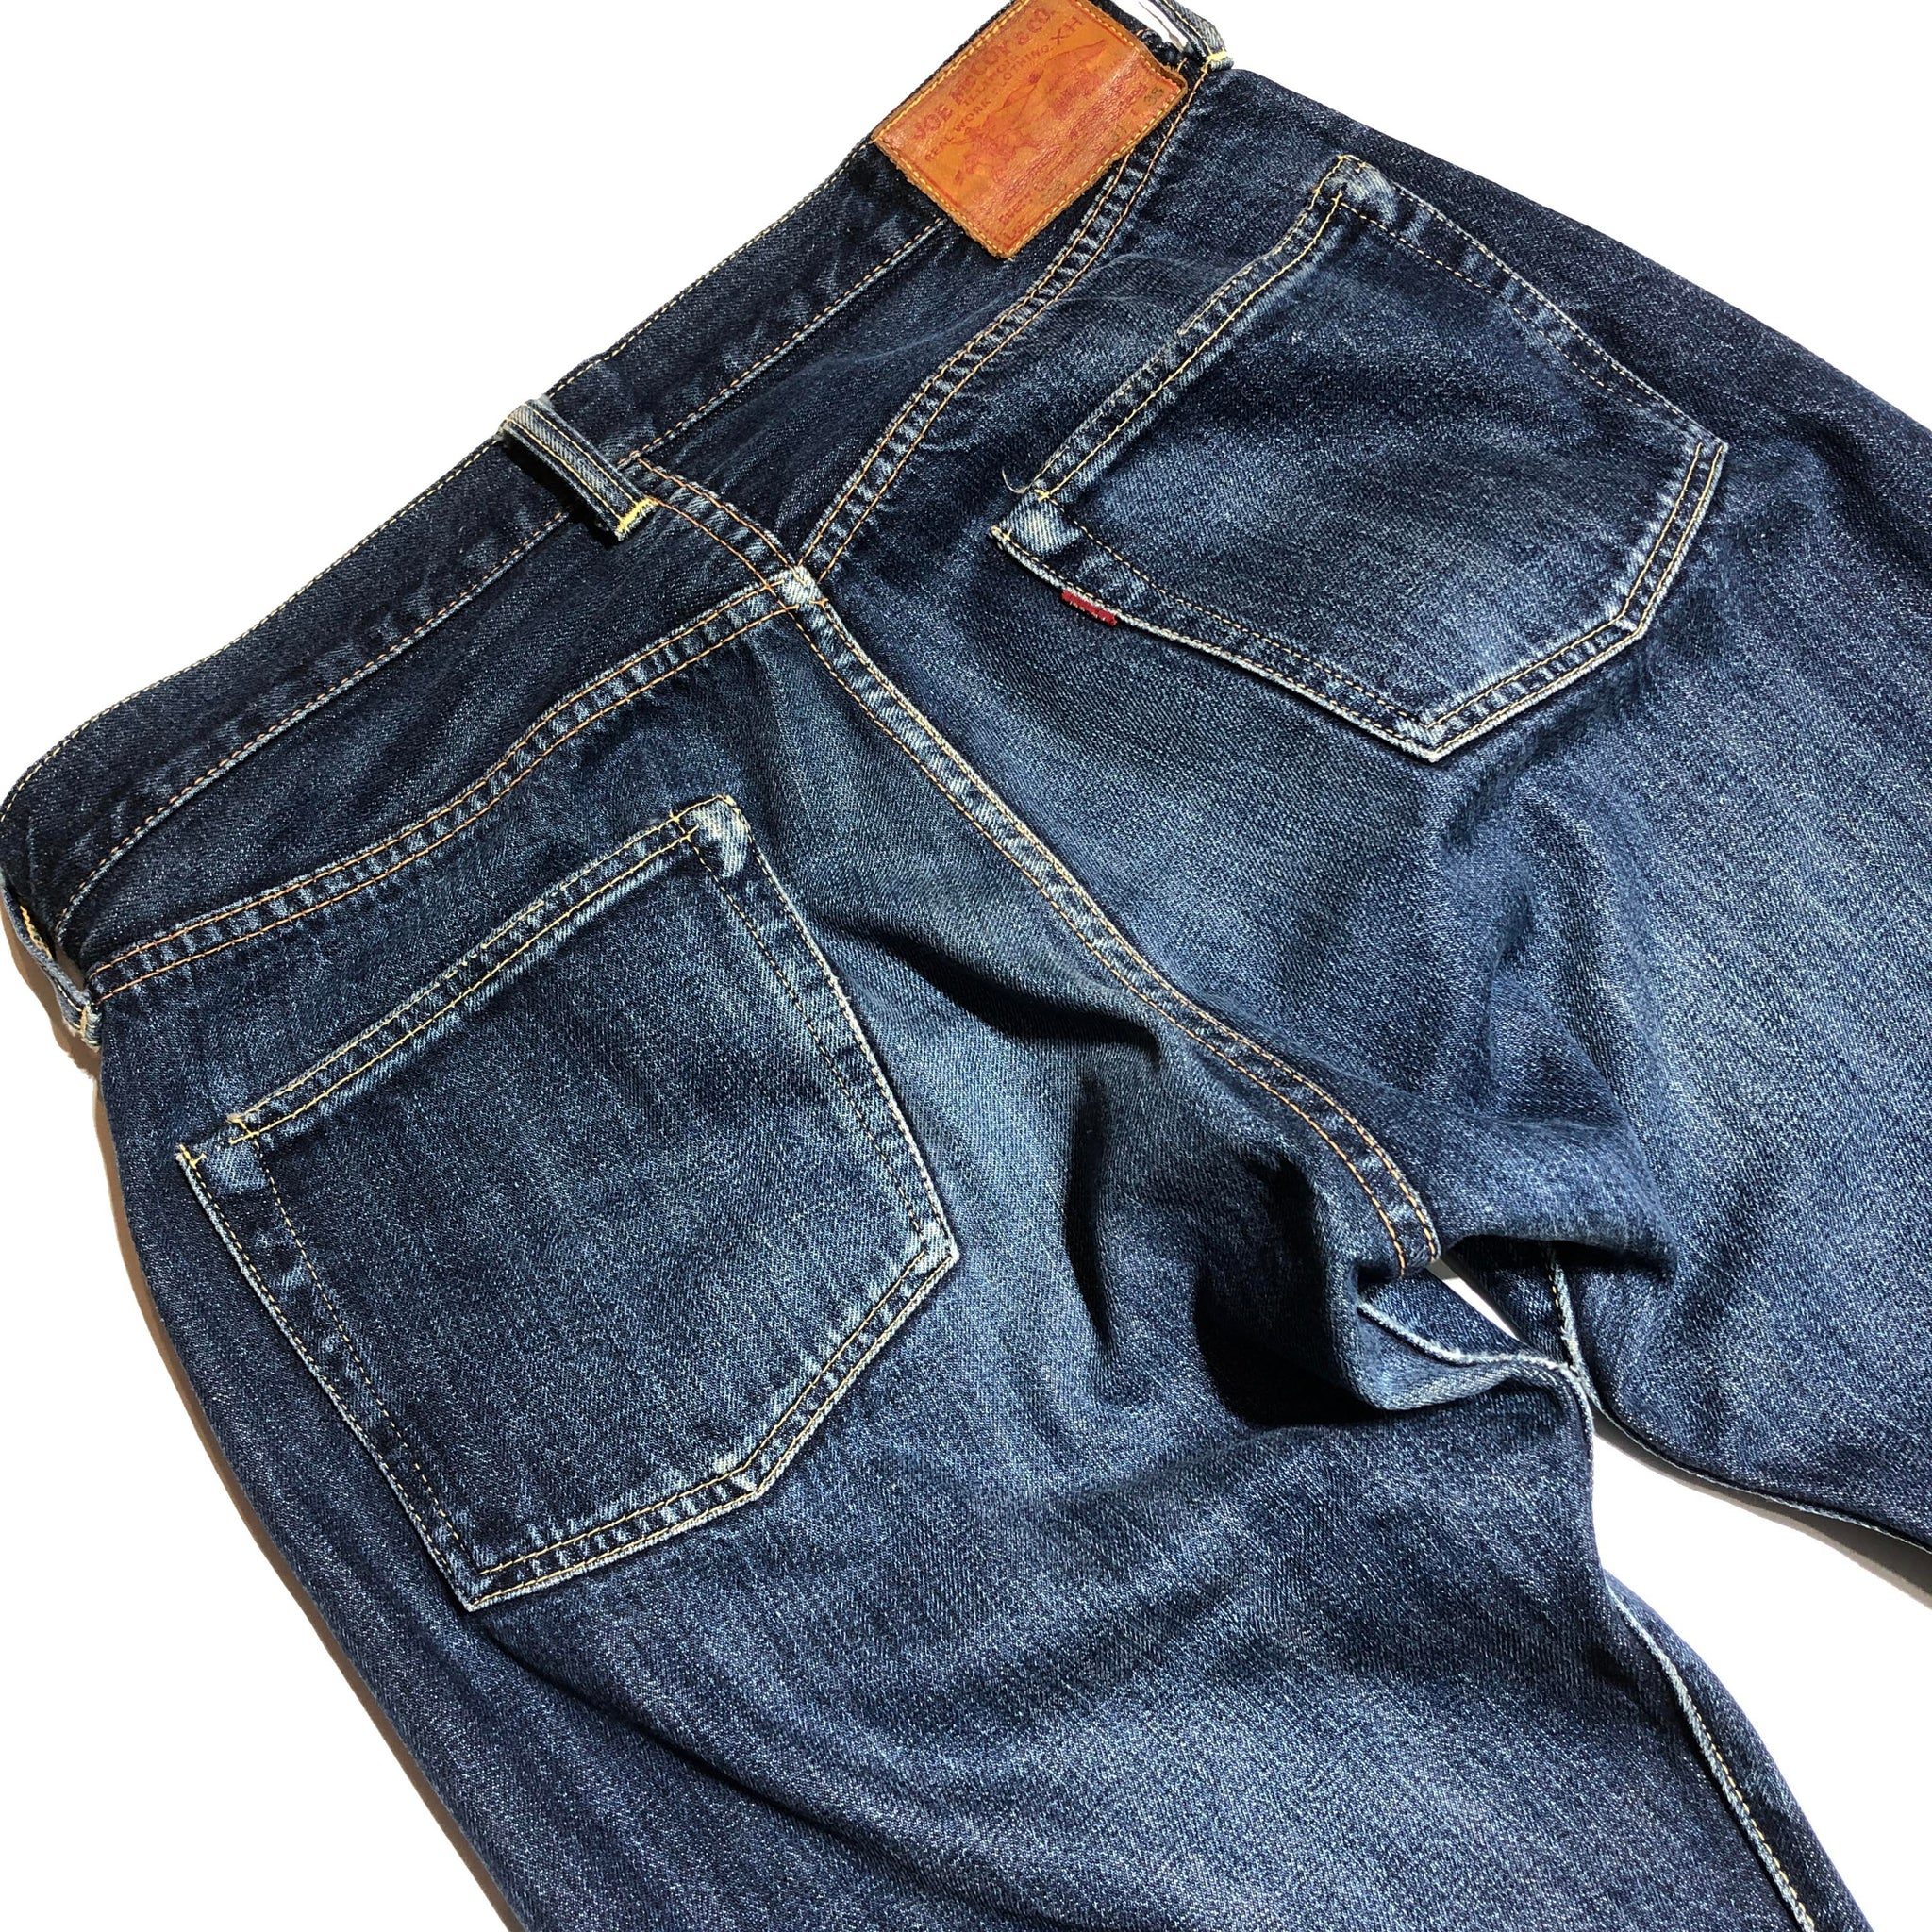 Want Sick Raw Denim Fades? Here’s How!